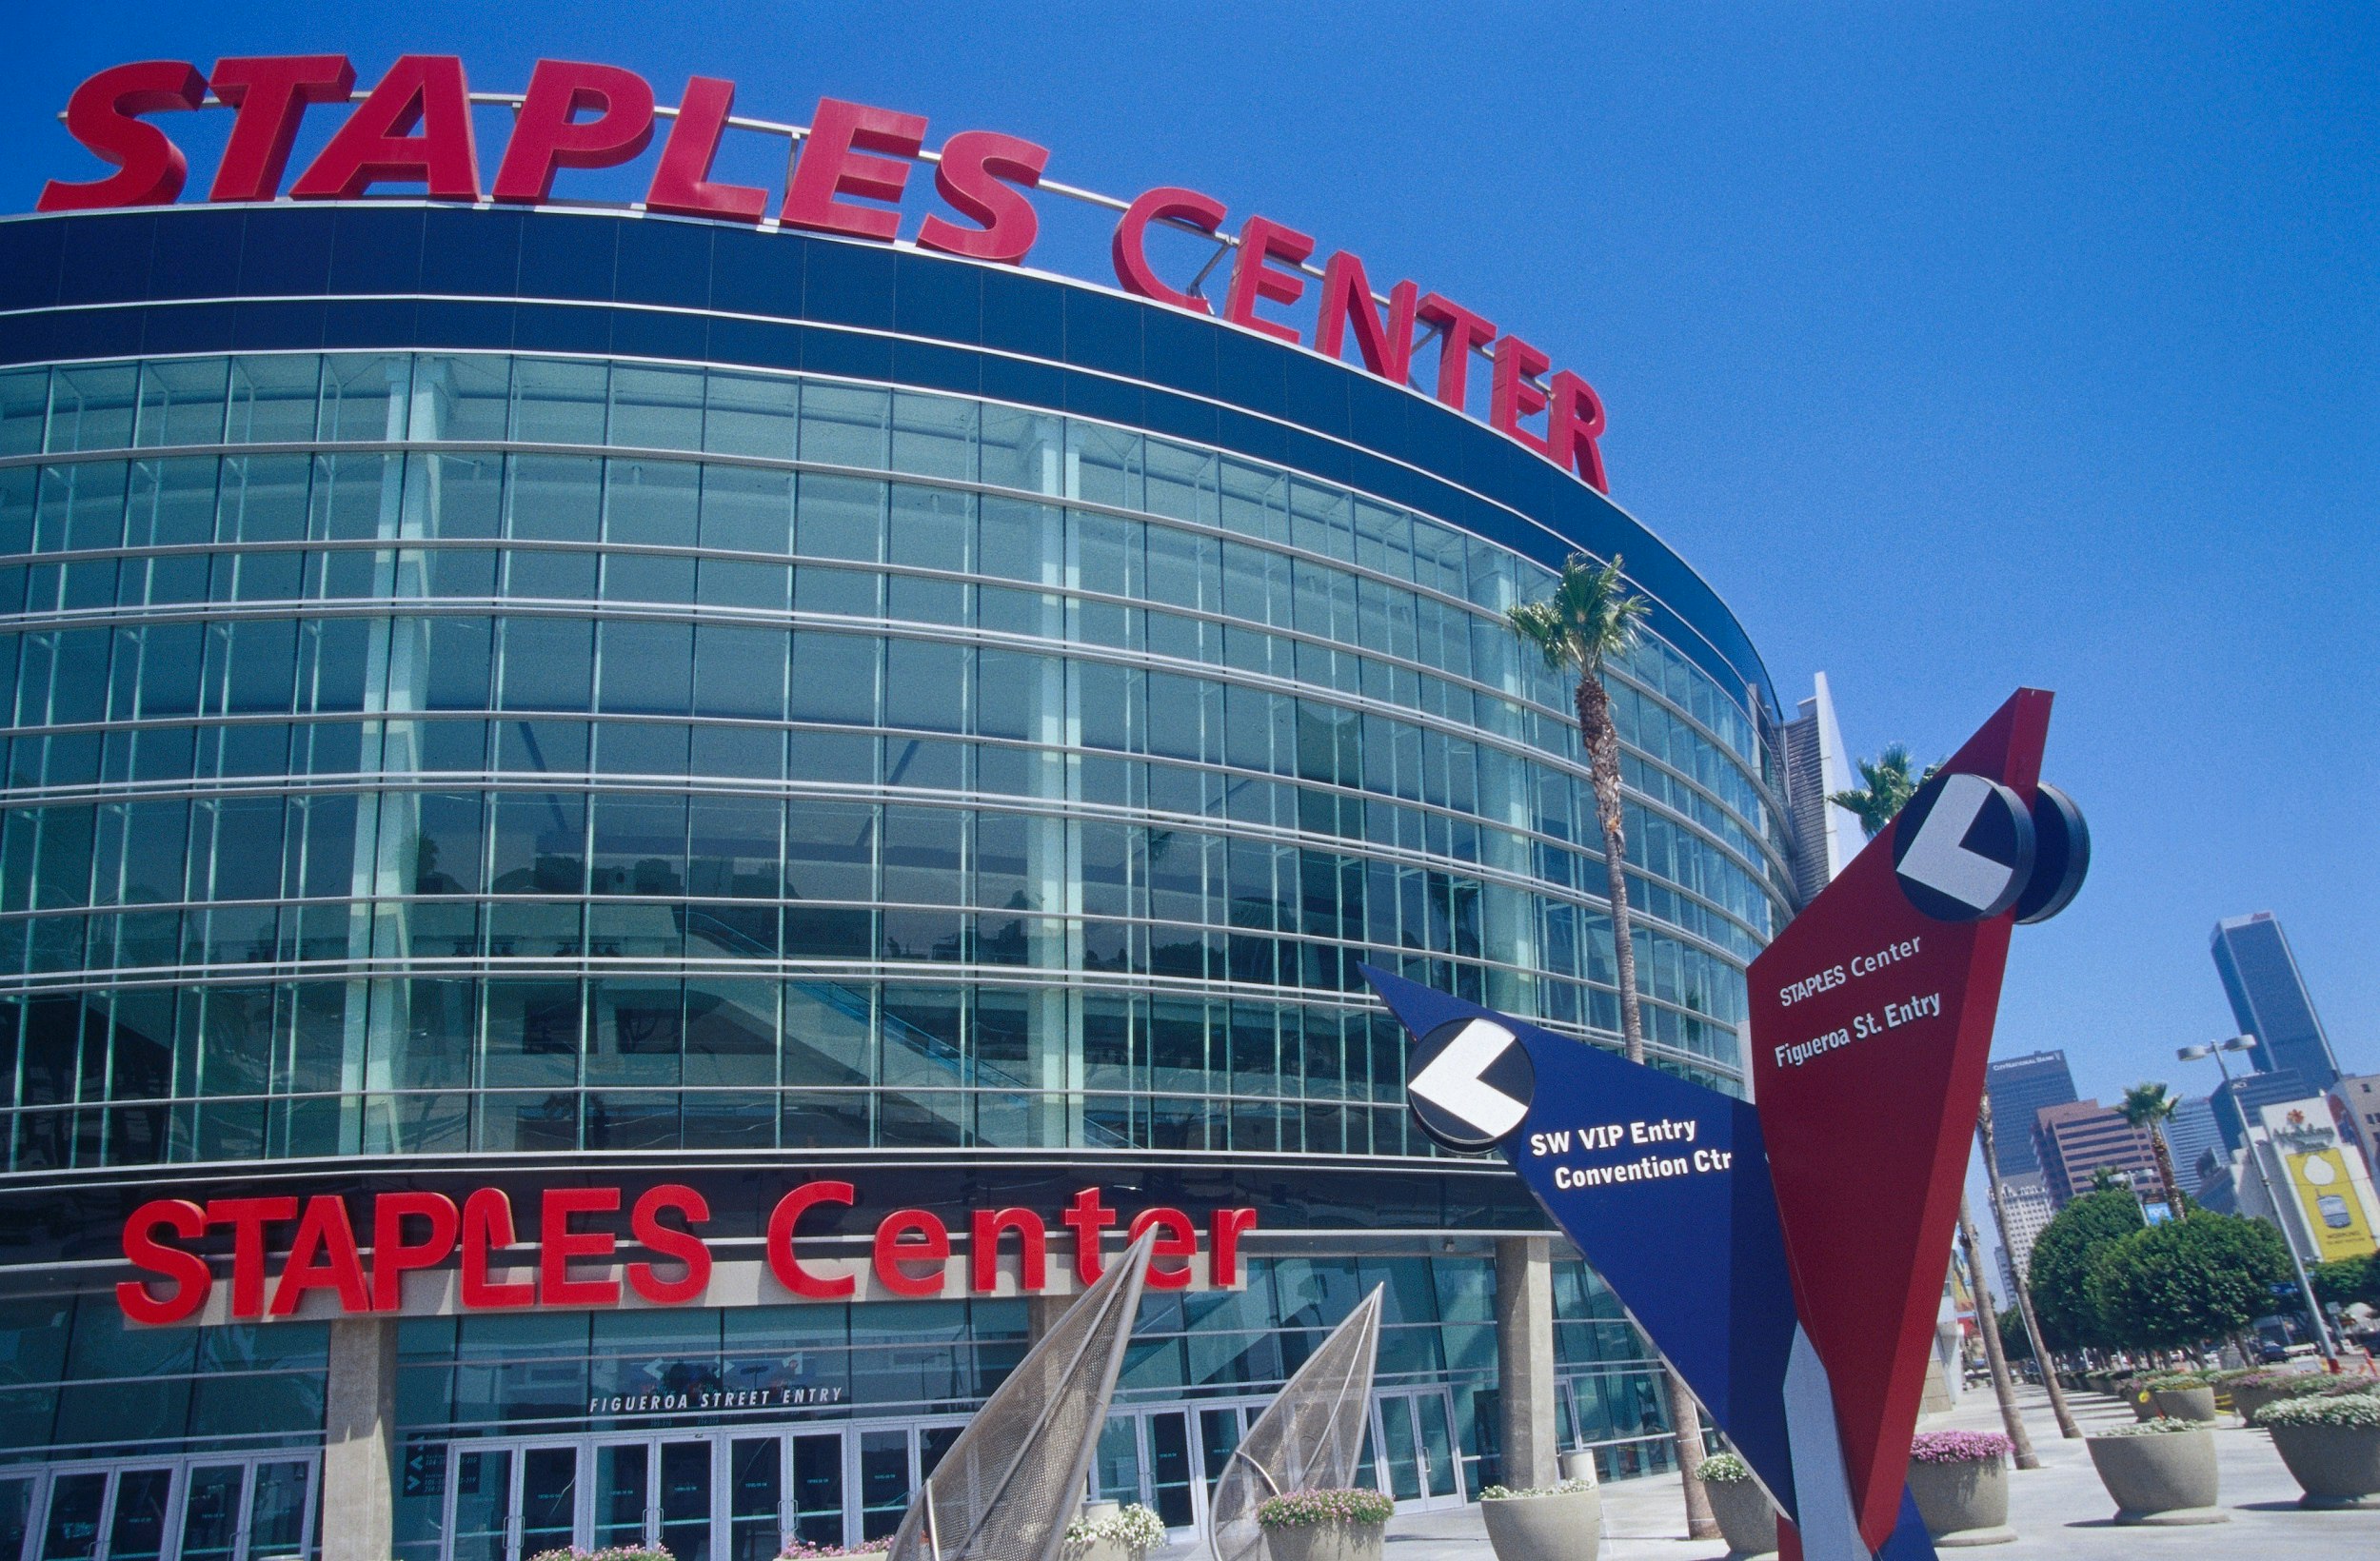 An exterior shot of Staples Center sports arena; the massive, curved glass structure has large red letters atop, and above the entrance, which state its name.